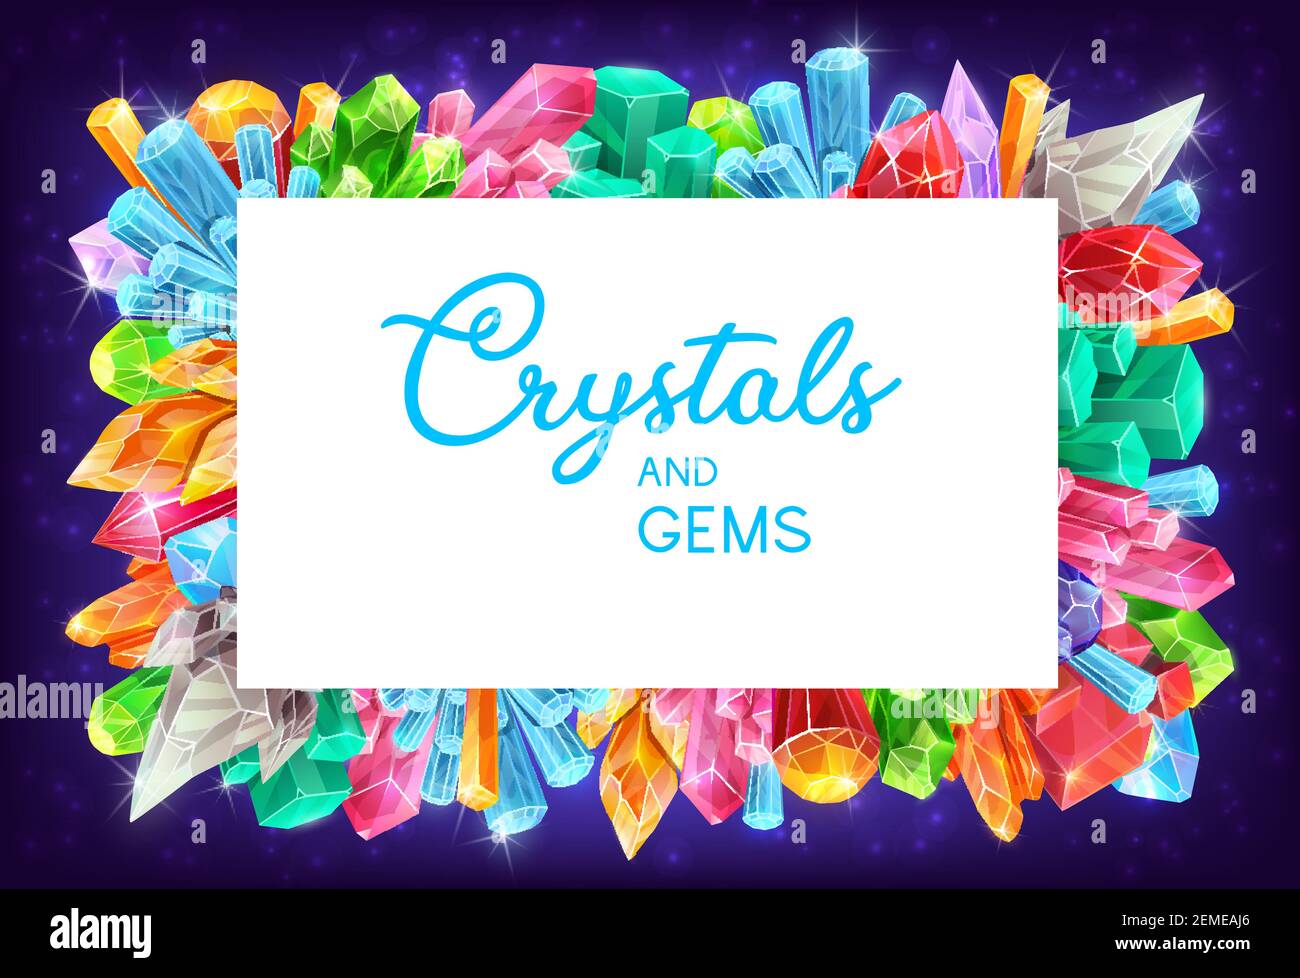 Crystals and gems, cartoon gemstones vector frame. Natural geologic minerals and precious stones mining. Jewels with sparkling shine, jewelry rocks of Stock Vector